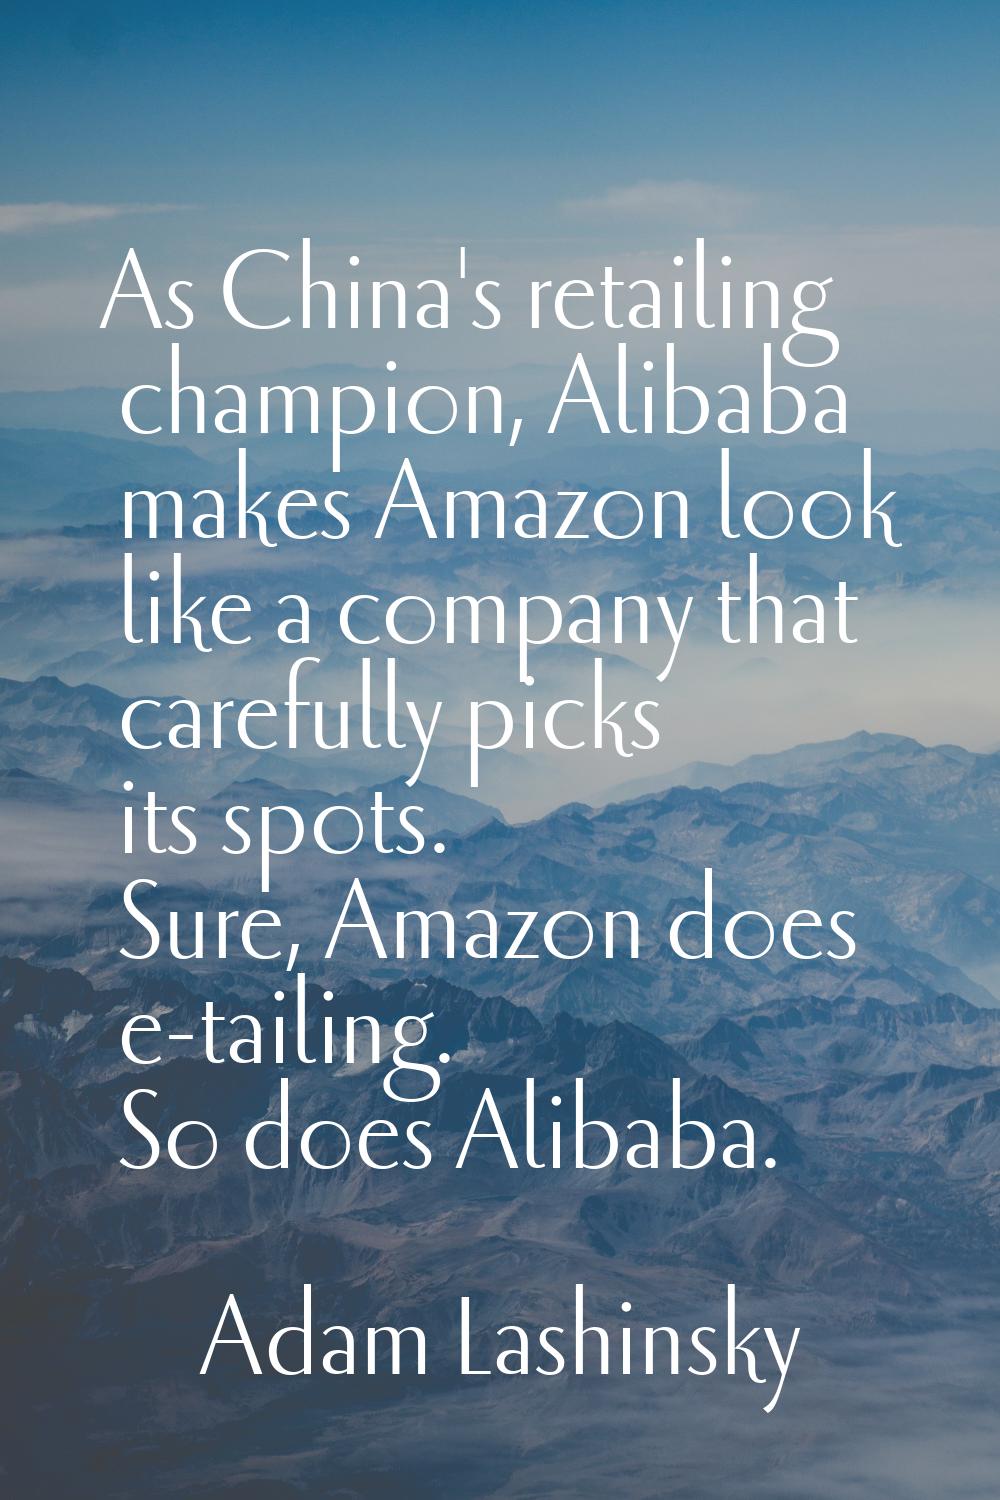 As China's retailing champion, Alibaba makes Amazon look like a company that carefully picks its sp